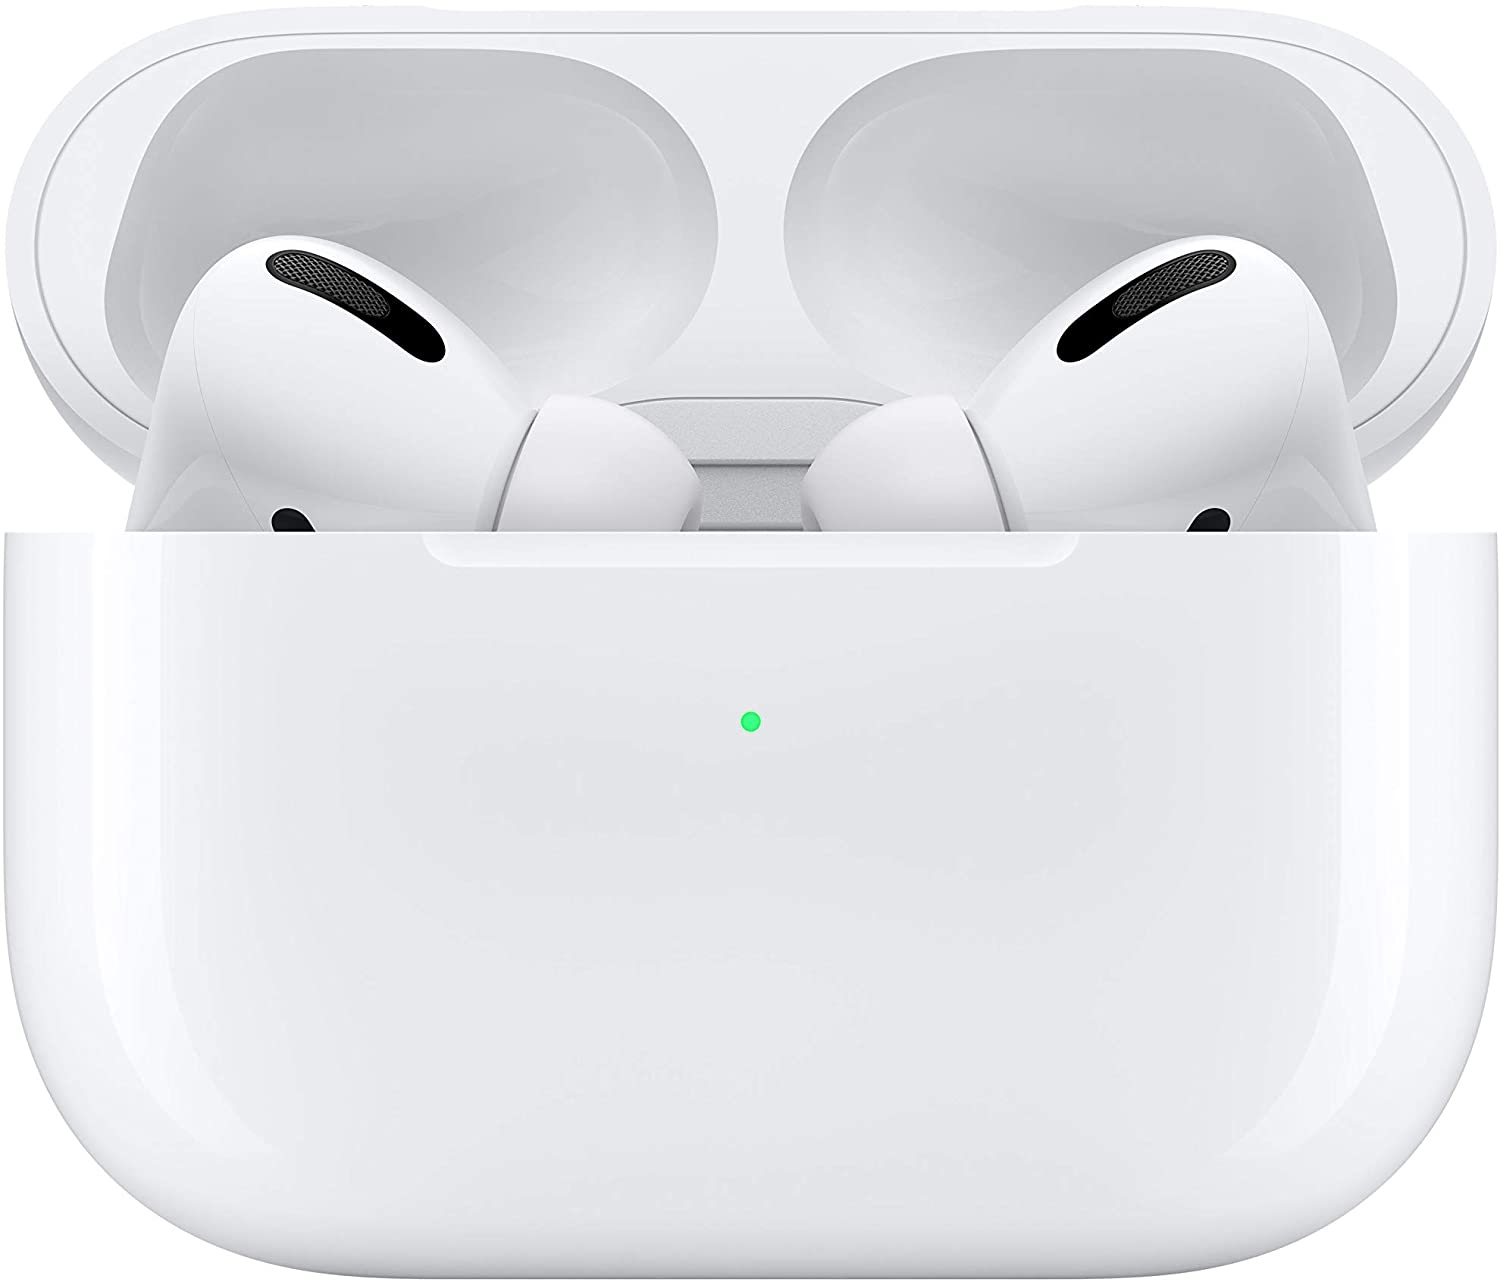 Apple's new AirPods Pro with MagSafe case see first Amazon discount | iMore